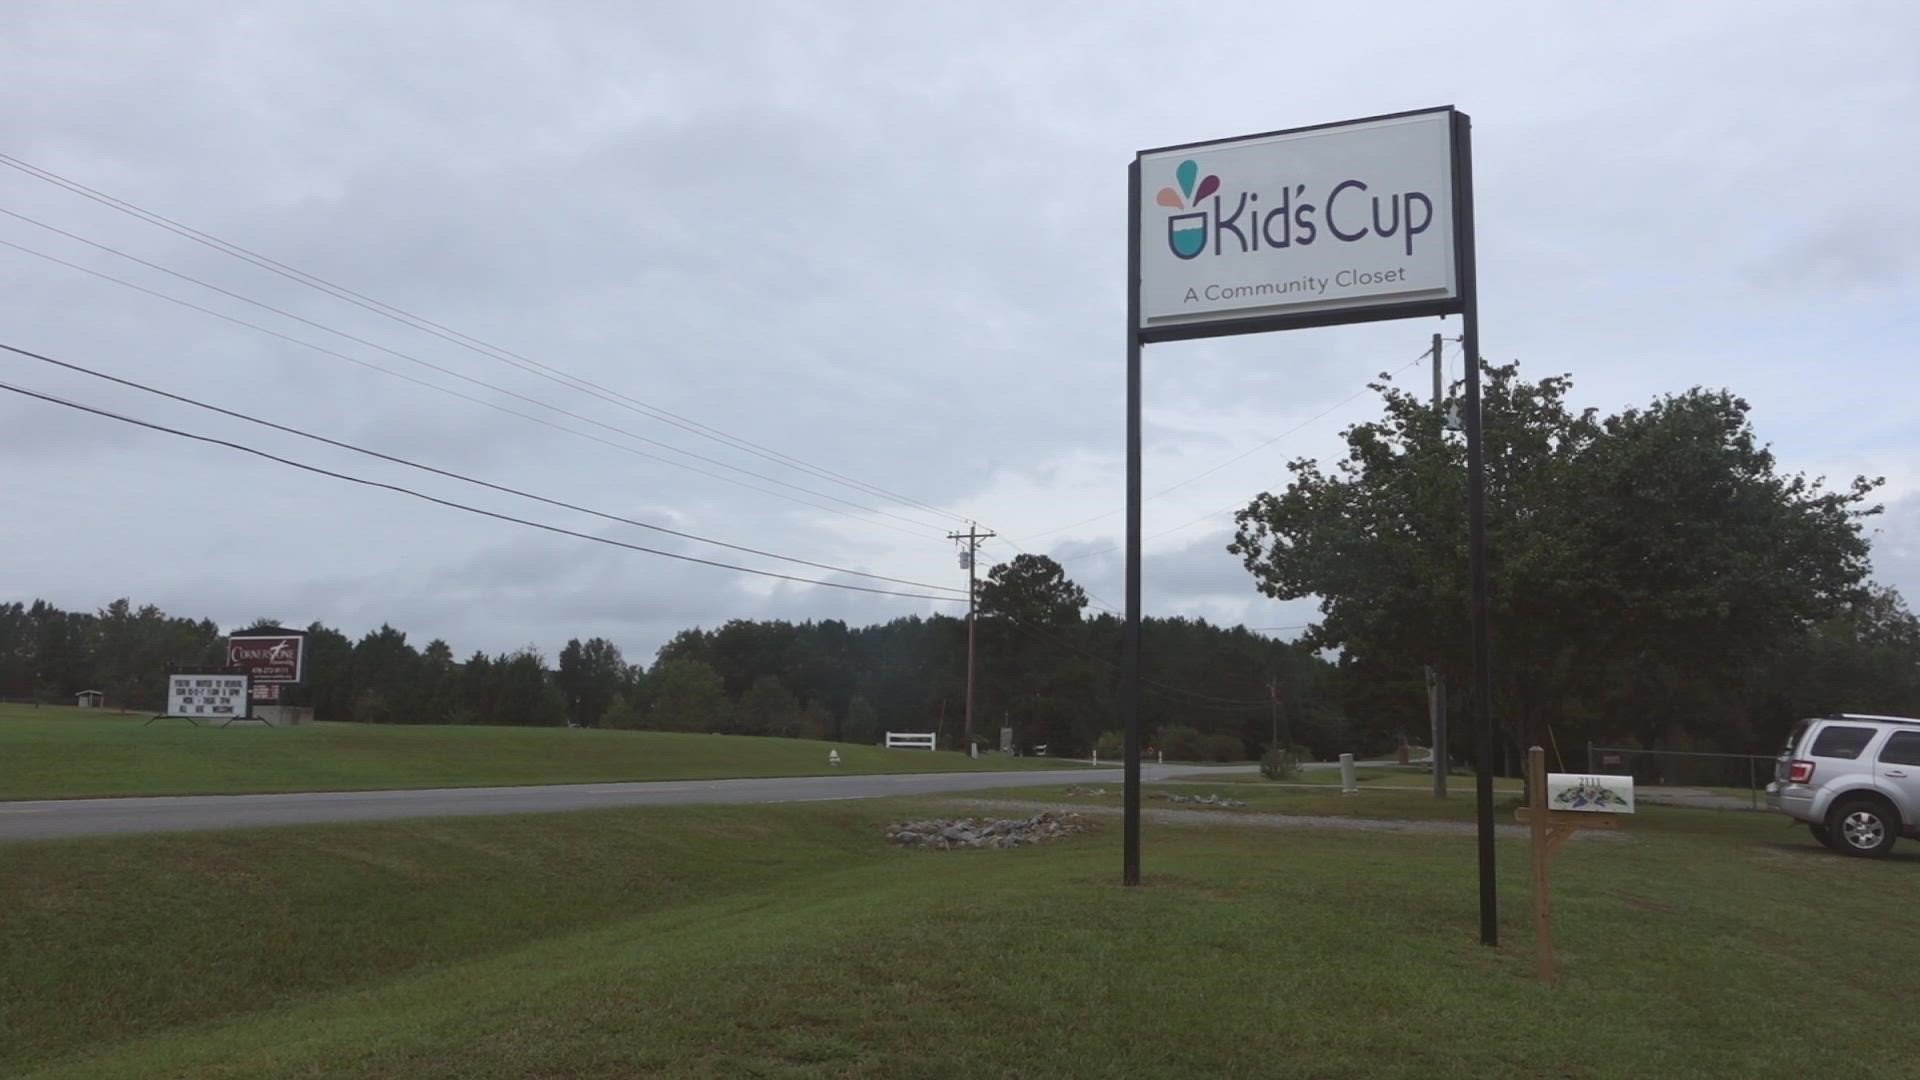 The Kid's Cup slogan is "loving neighbors, filling needs, and making friends."